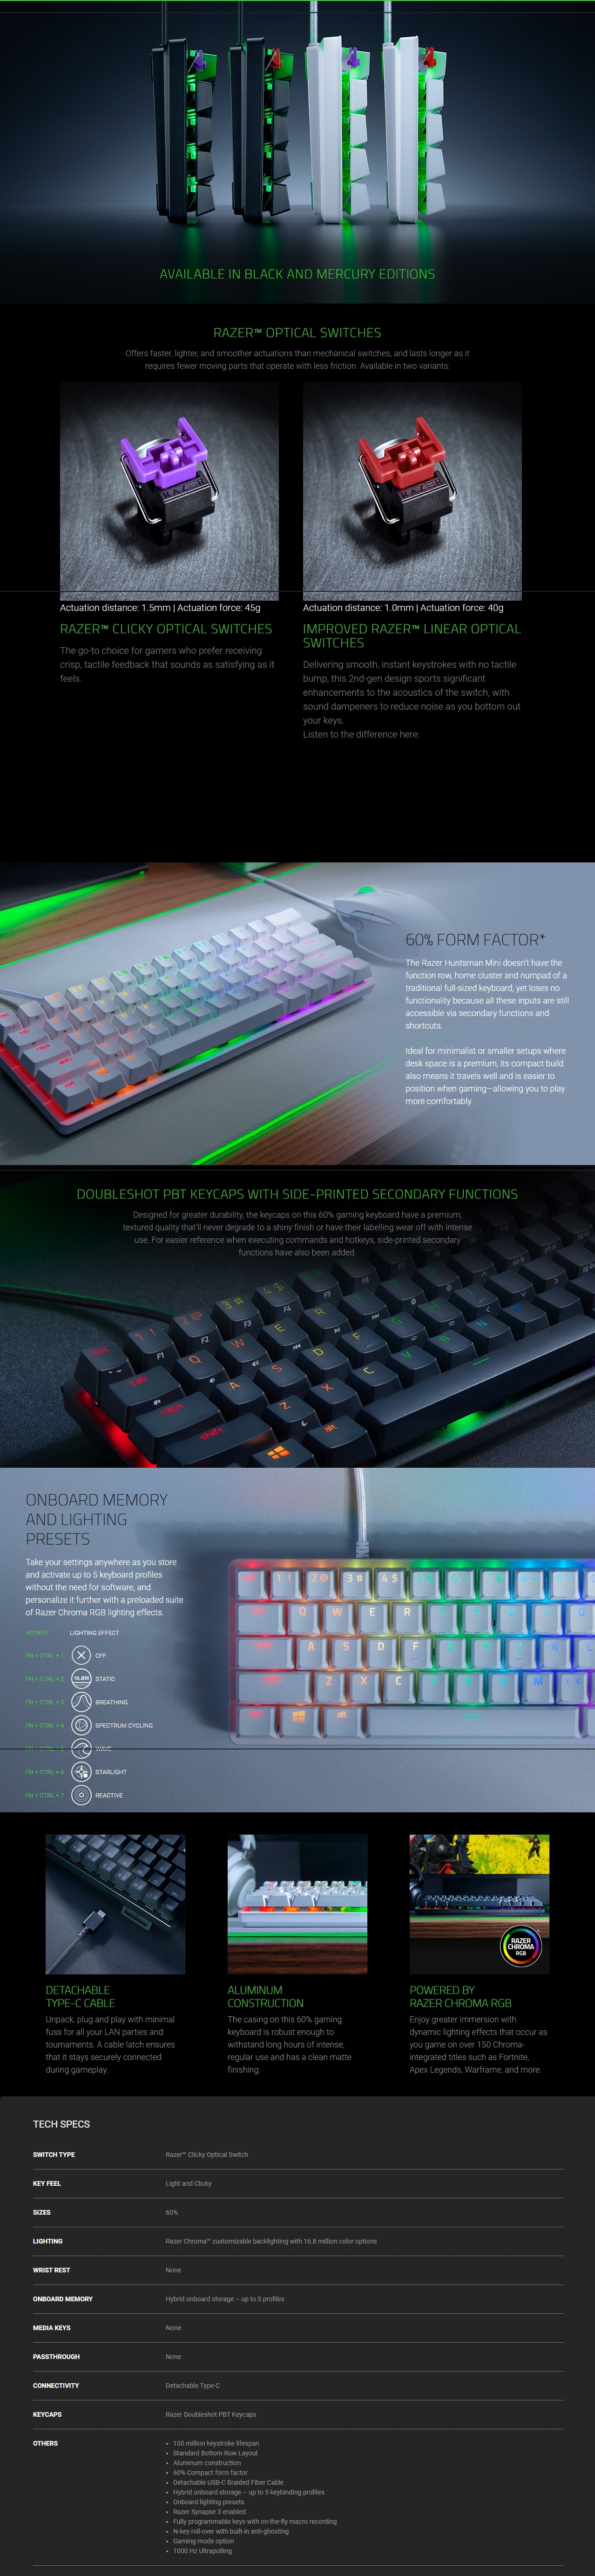 A large marketing image providing additional information about the product Razer Huntsman Mini - Opto-Mechanical Chroma Gaming Keyboard (Purple Switch) - Additional alt info not provided